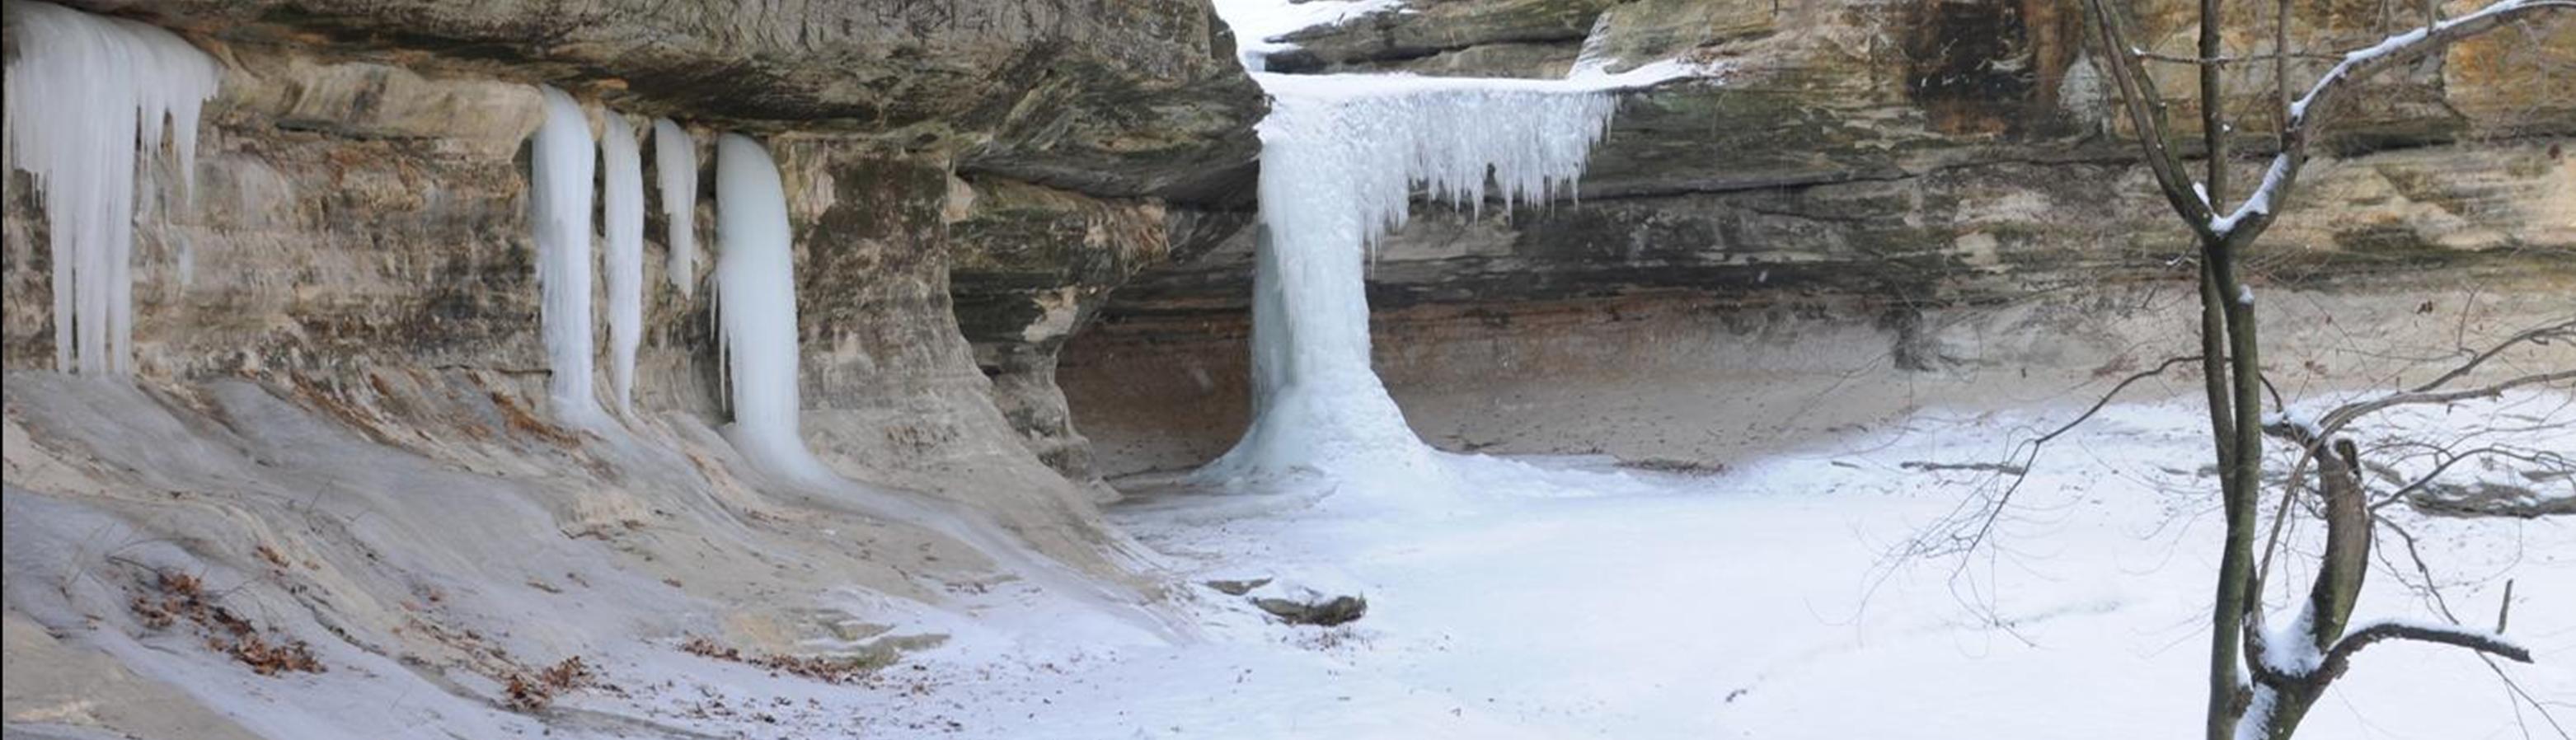 A Starved Rock State Park waterfall in winter